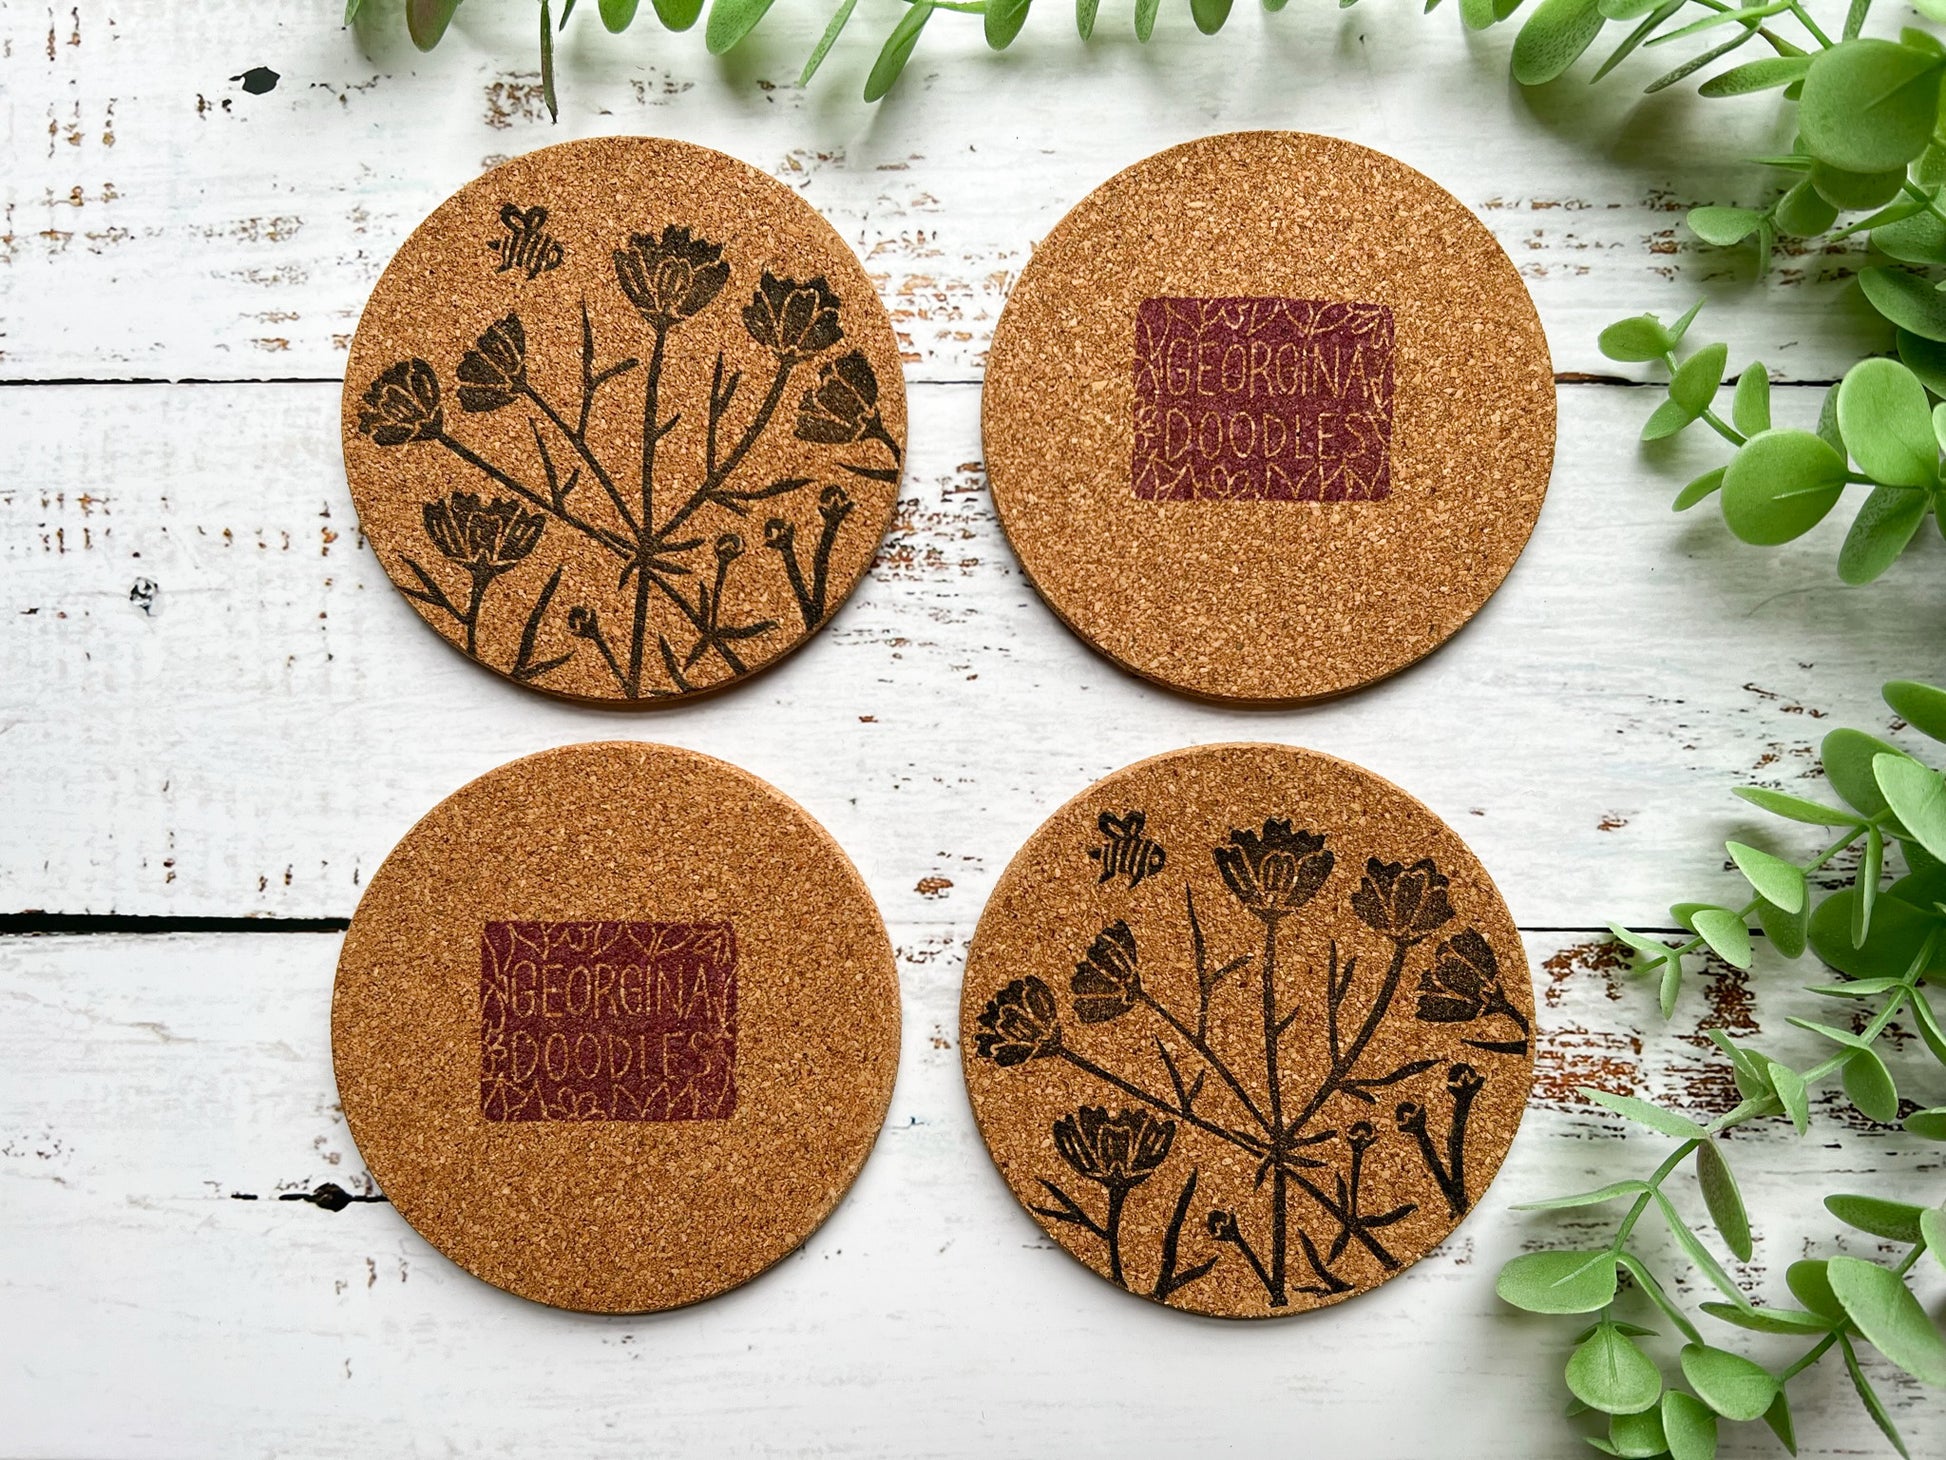 A set of four natural cork coasters with a black floral motif including a bee. Two coasters have been turned over to reveal the underneath and show the logo.